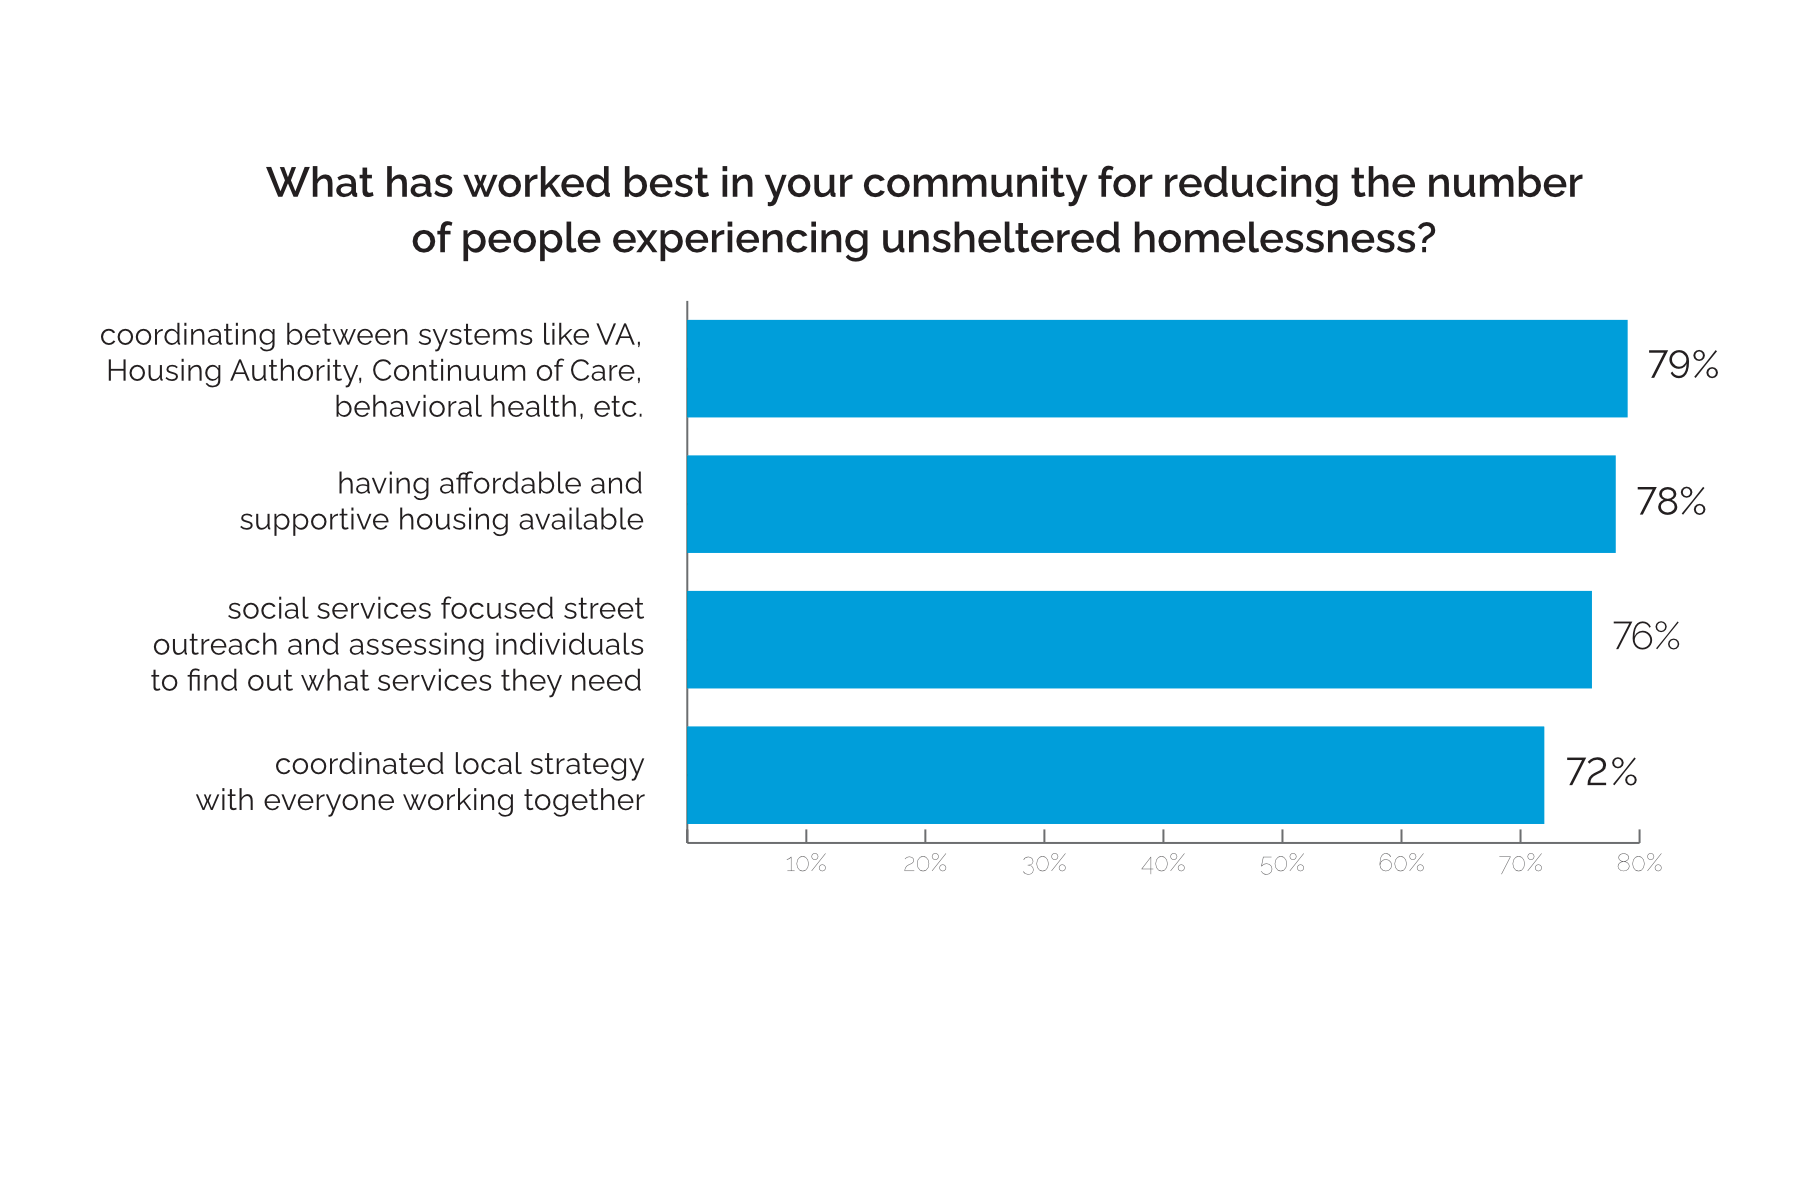 What has worked best in your community for reducing the number of people experiencing unsheltered homelessness?